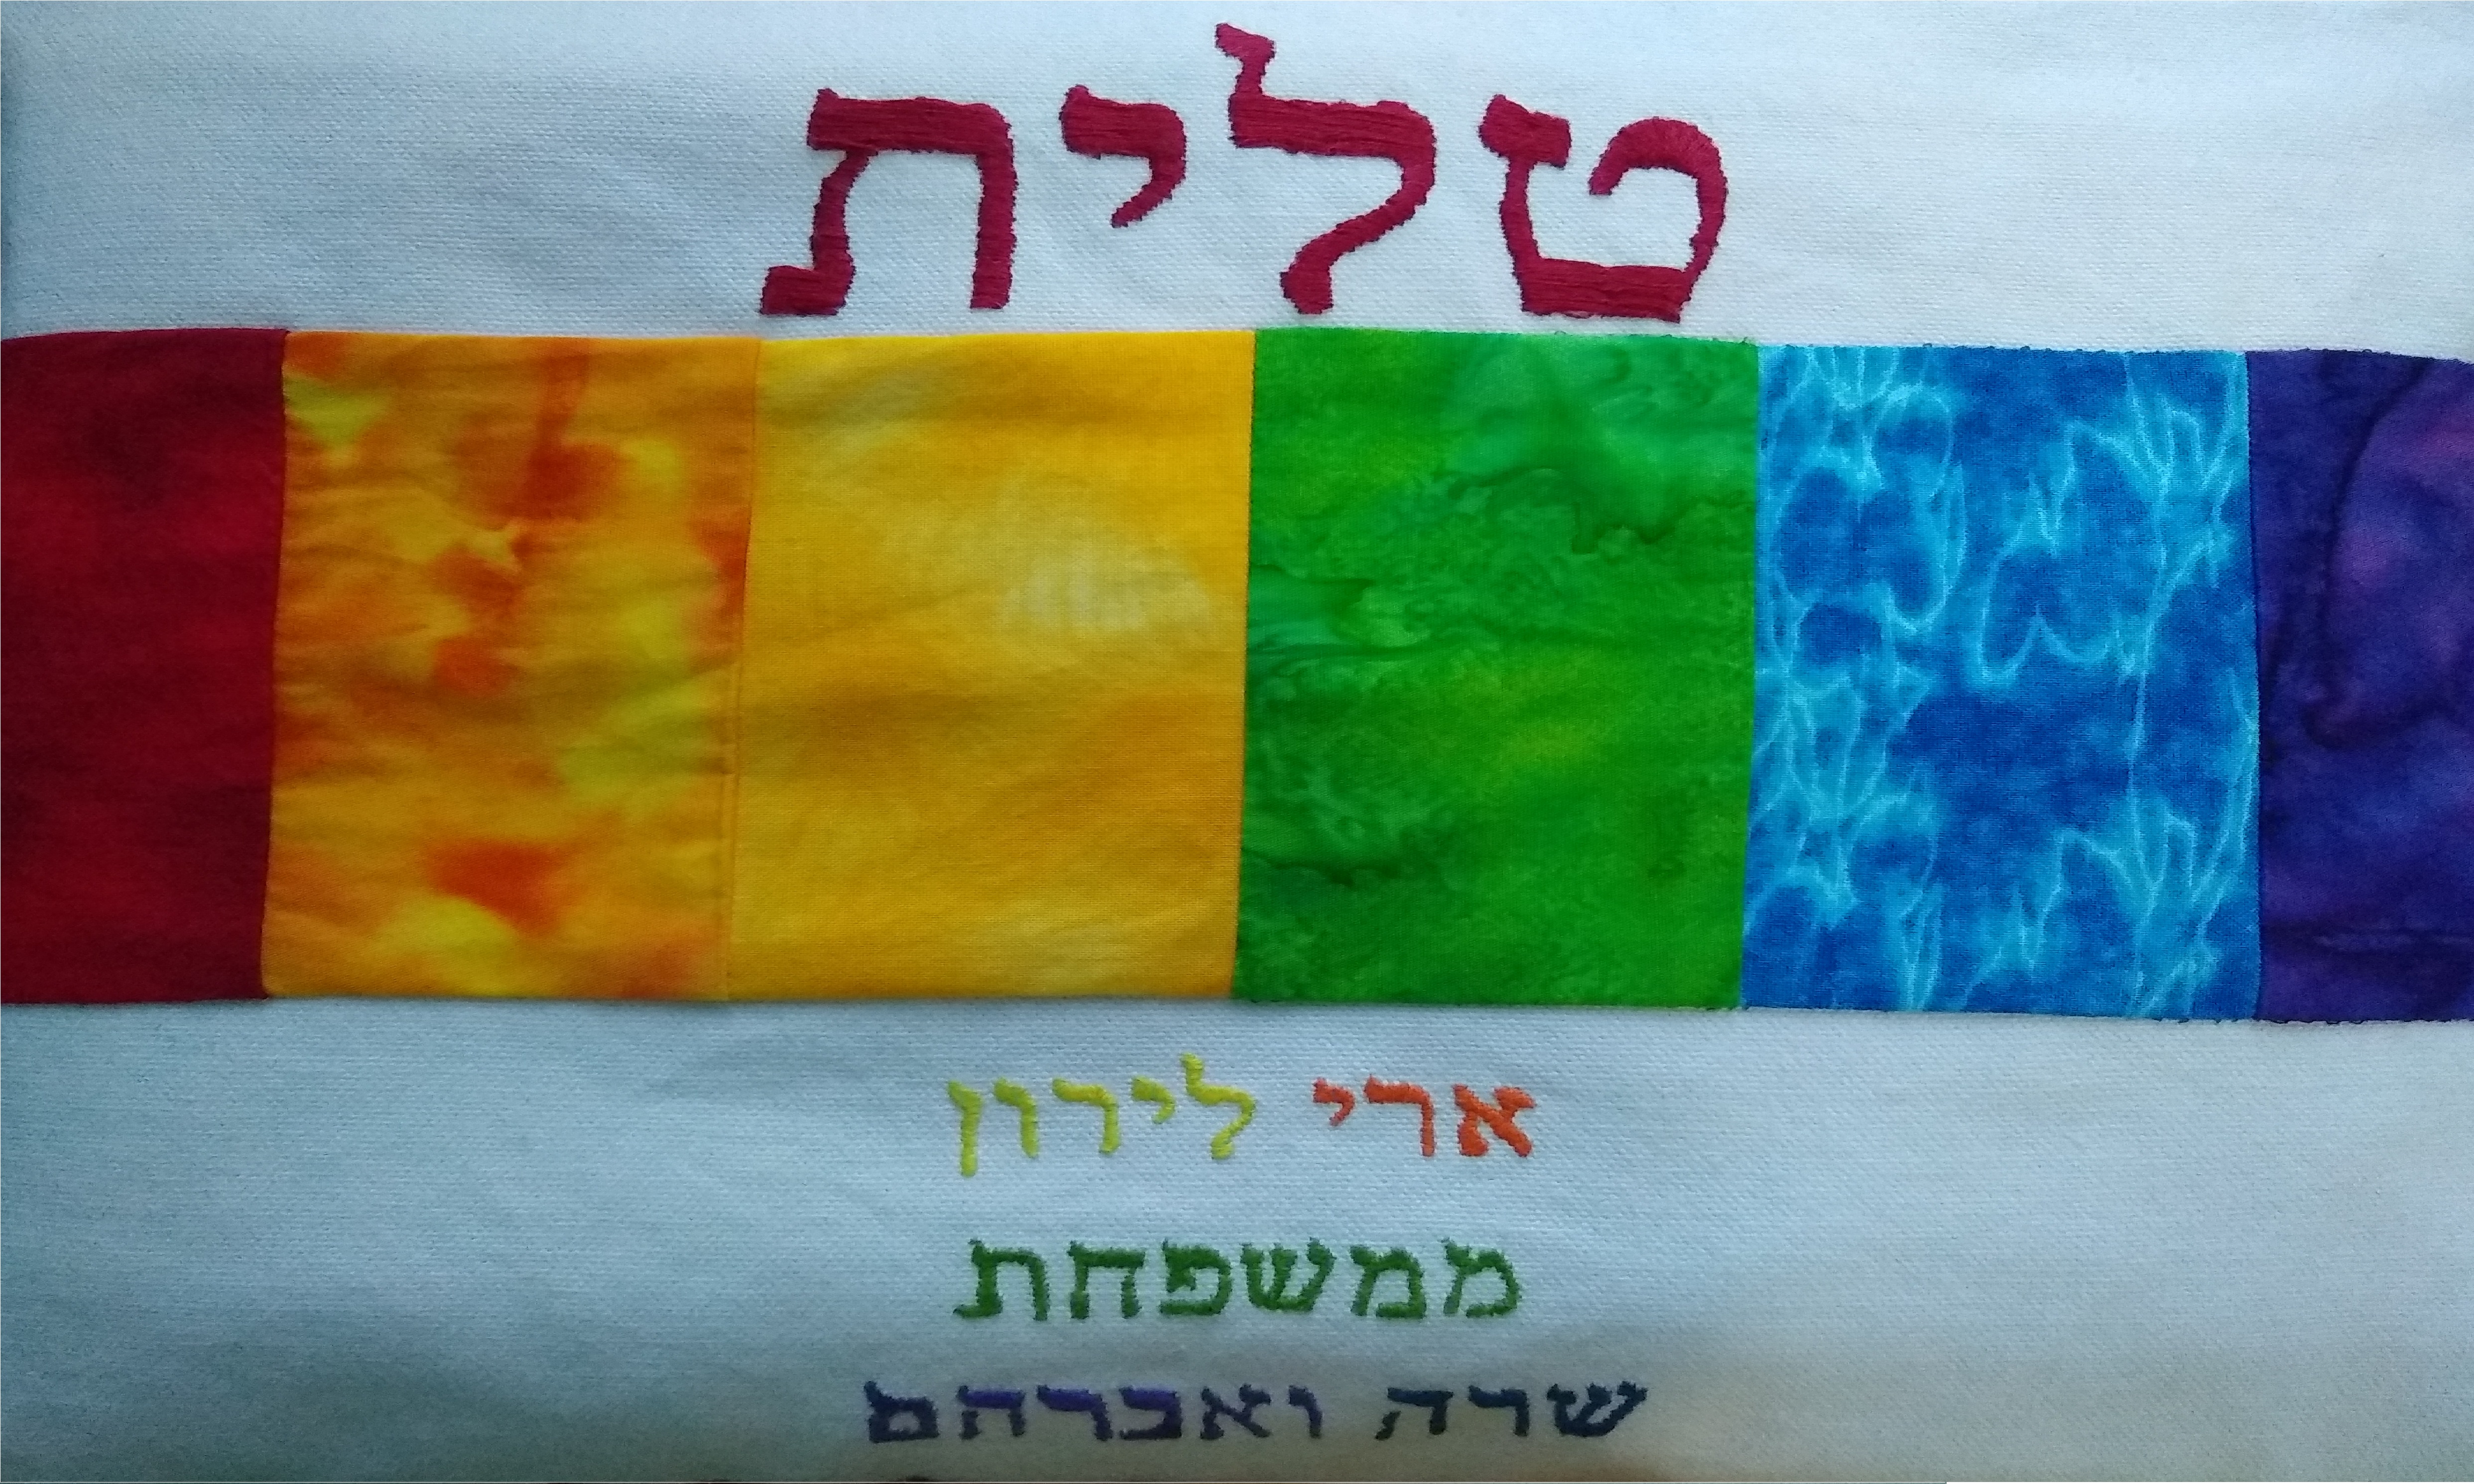 A white tallit bag with rainbow fabric and emboridered hebrew text.